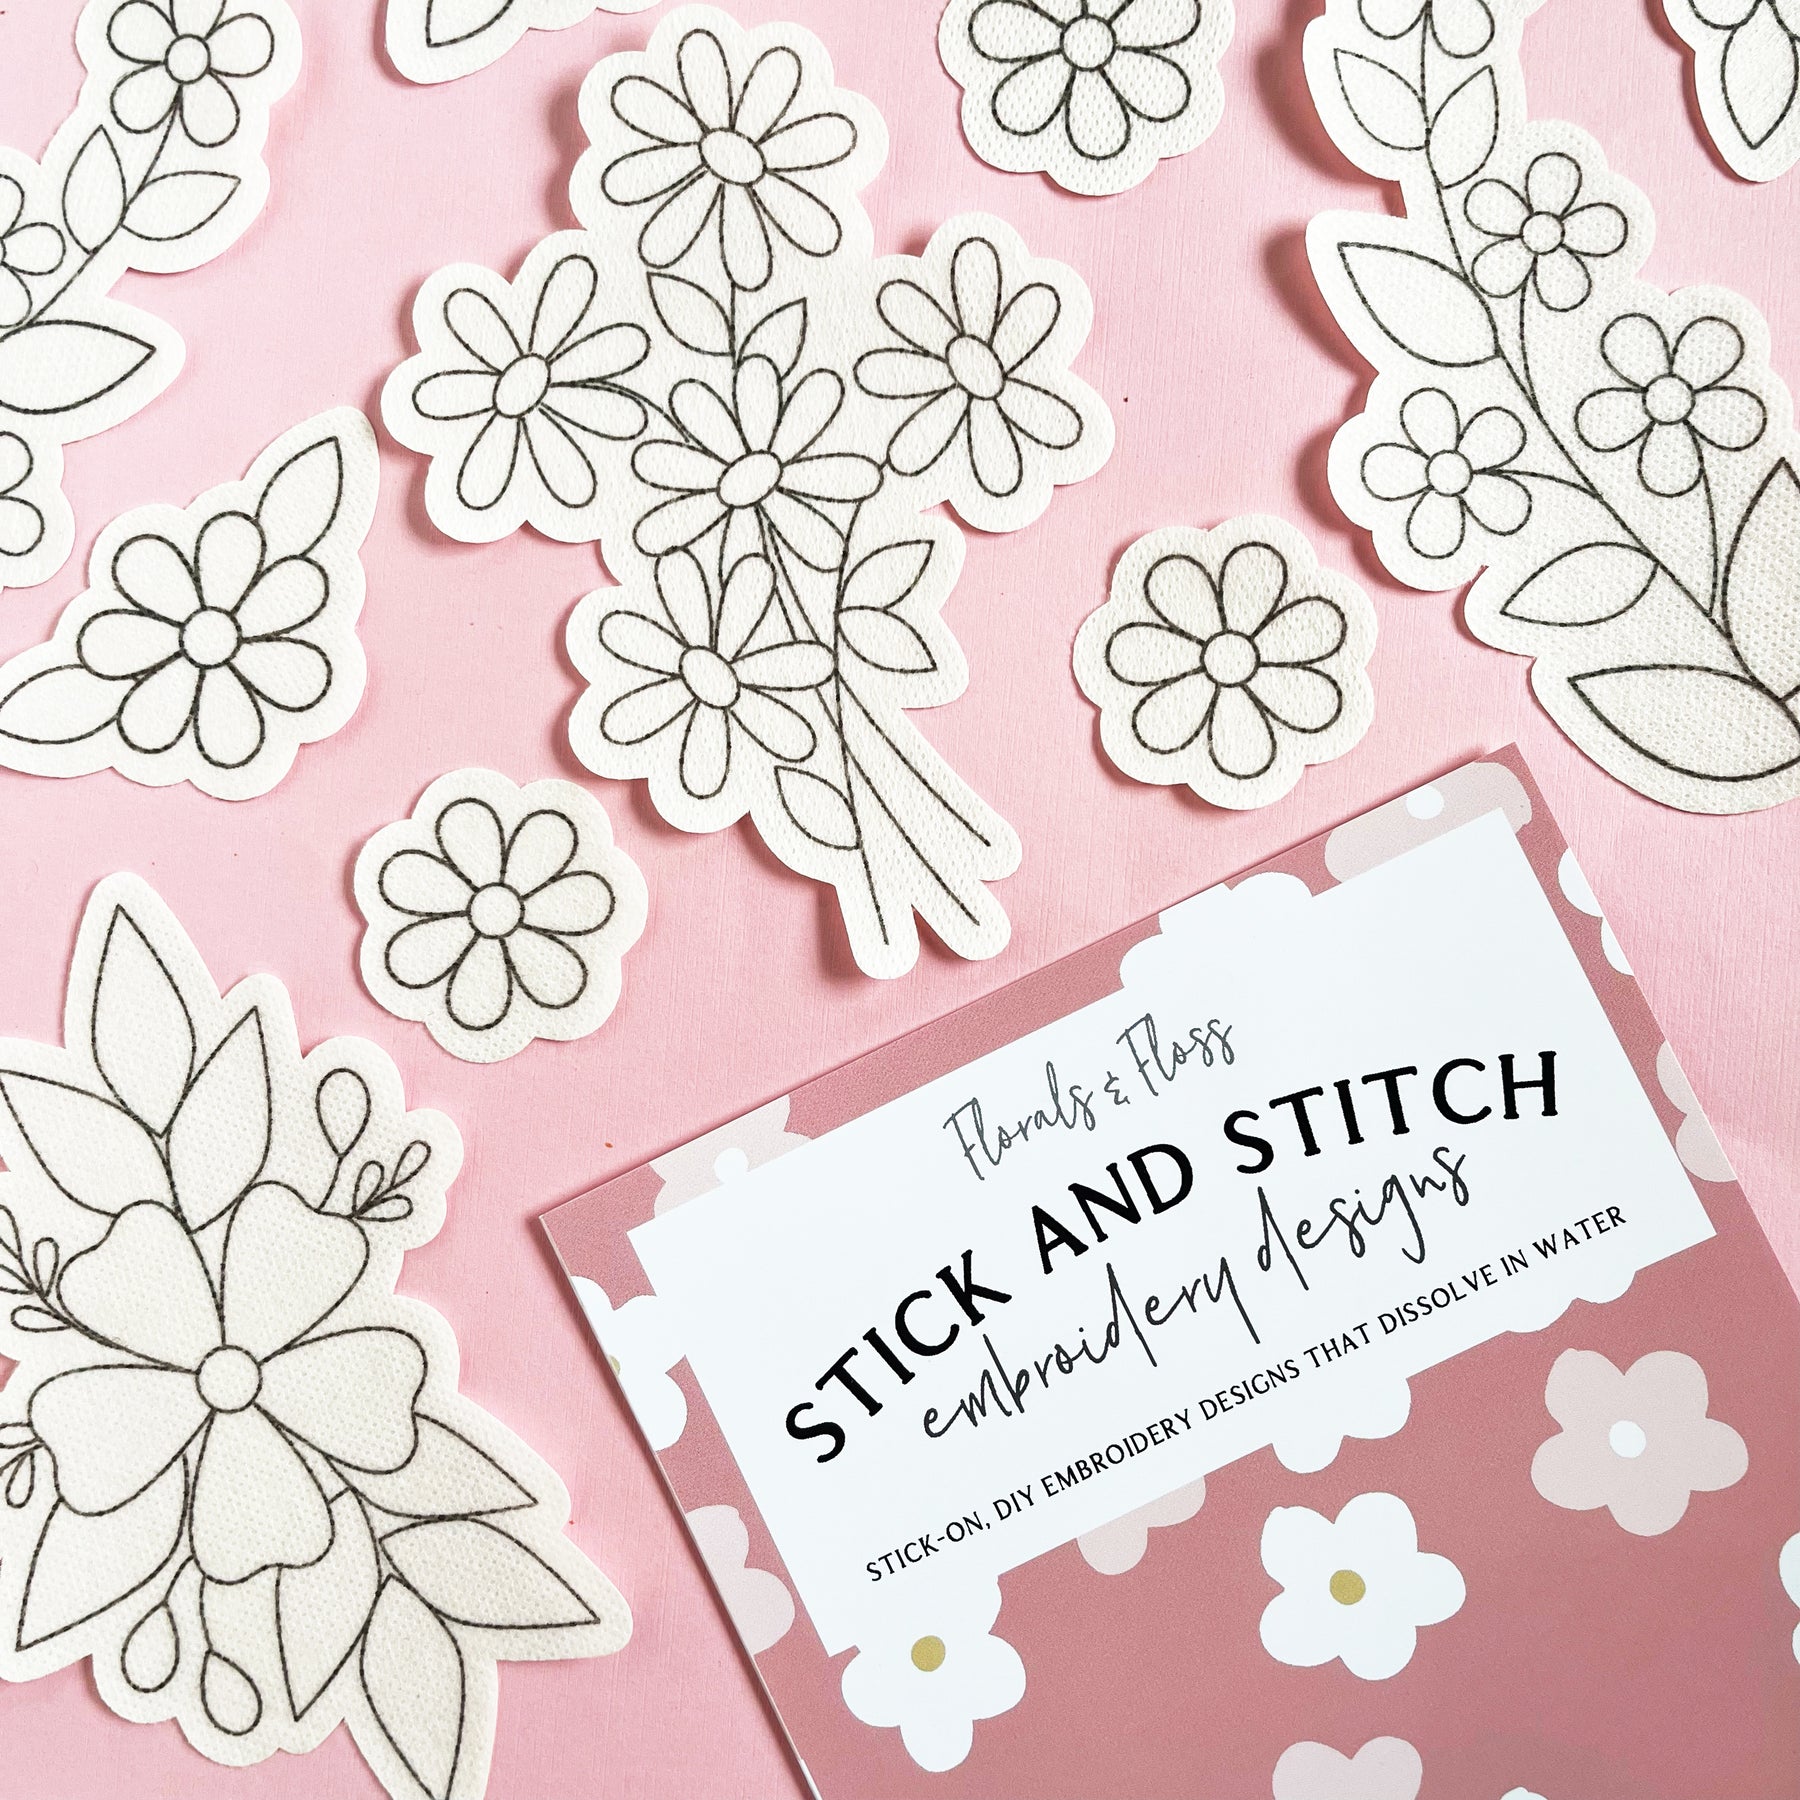 Stick and Stitch Embroidery Designs